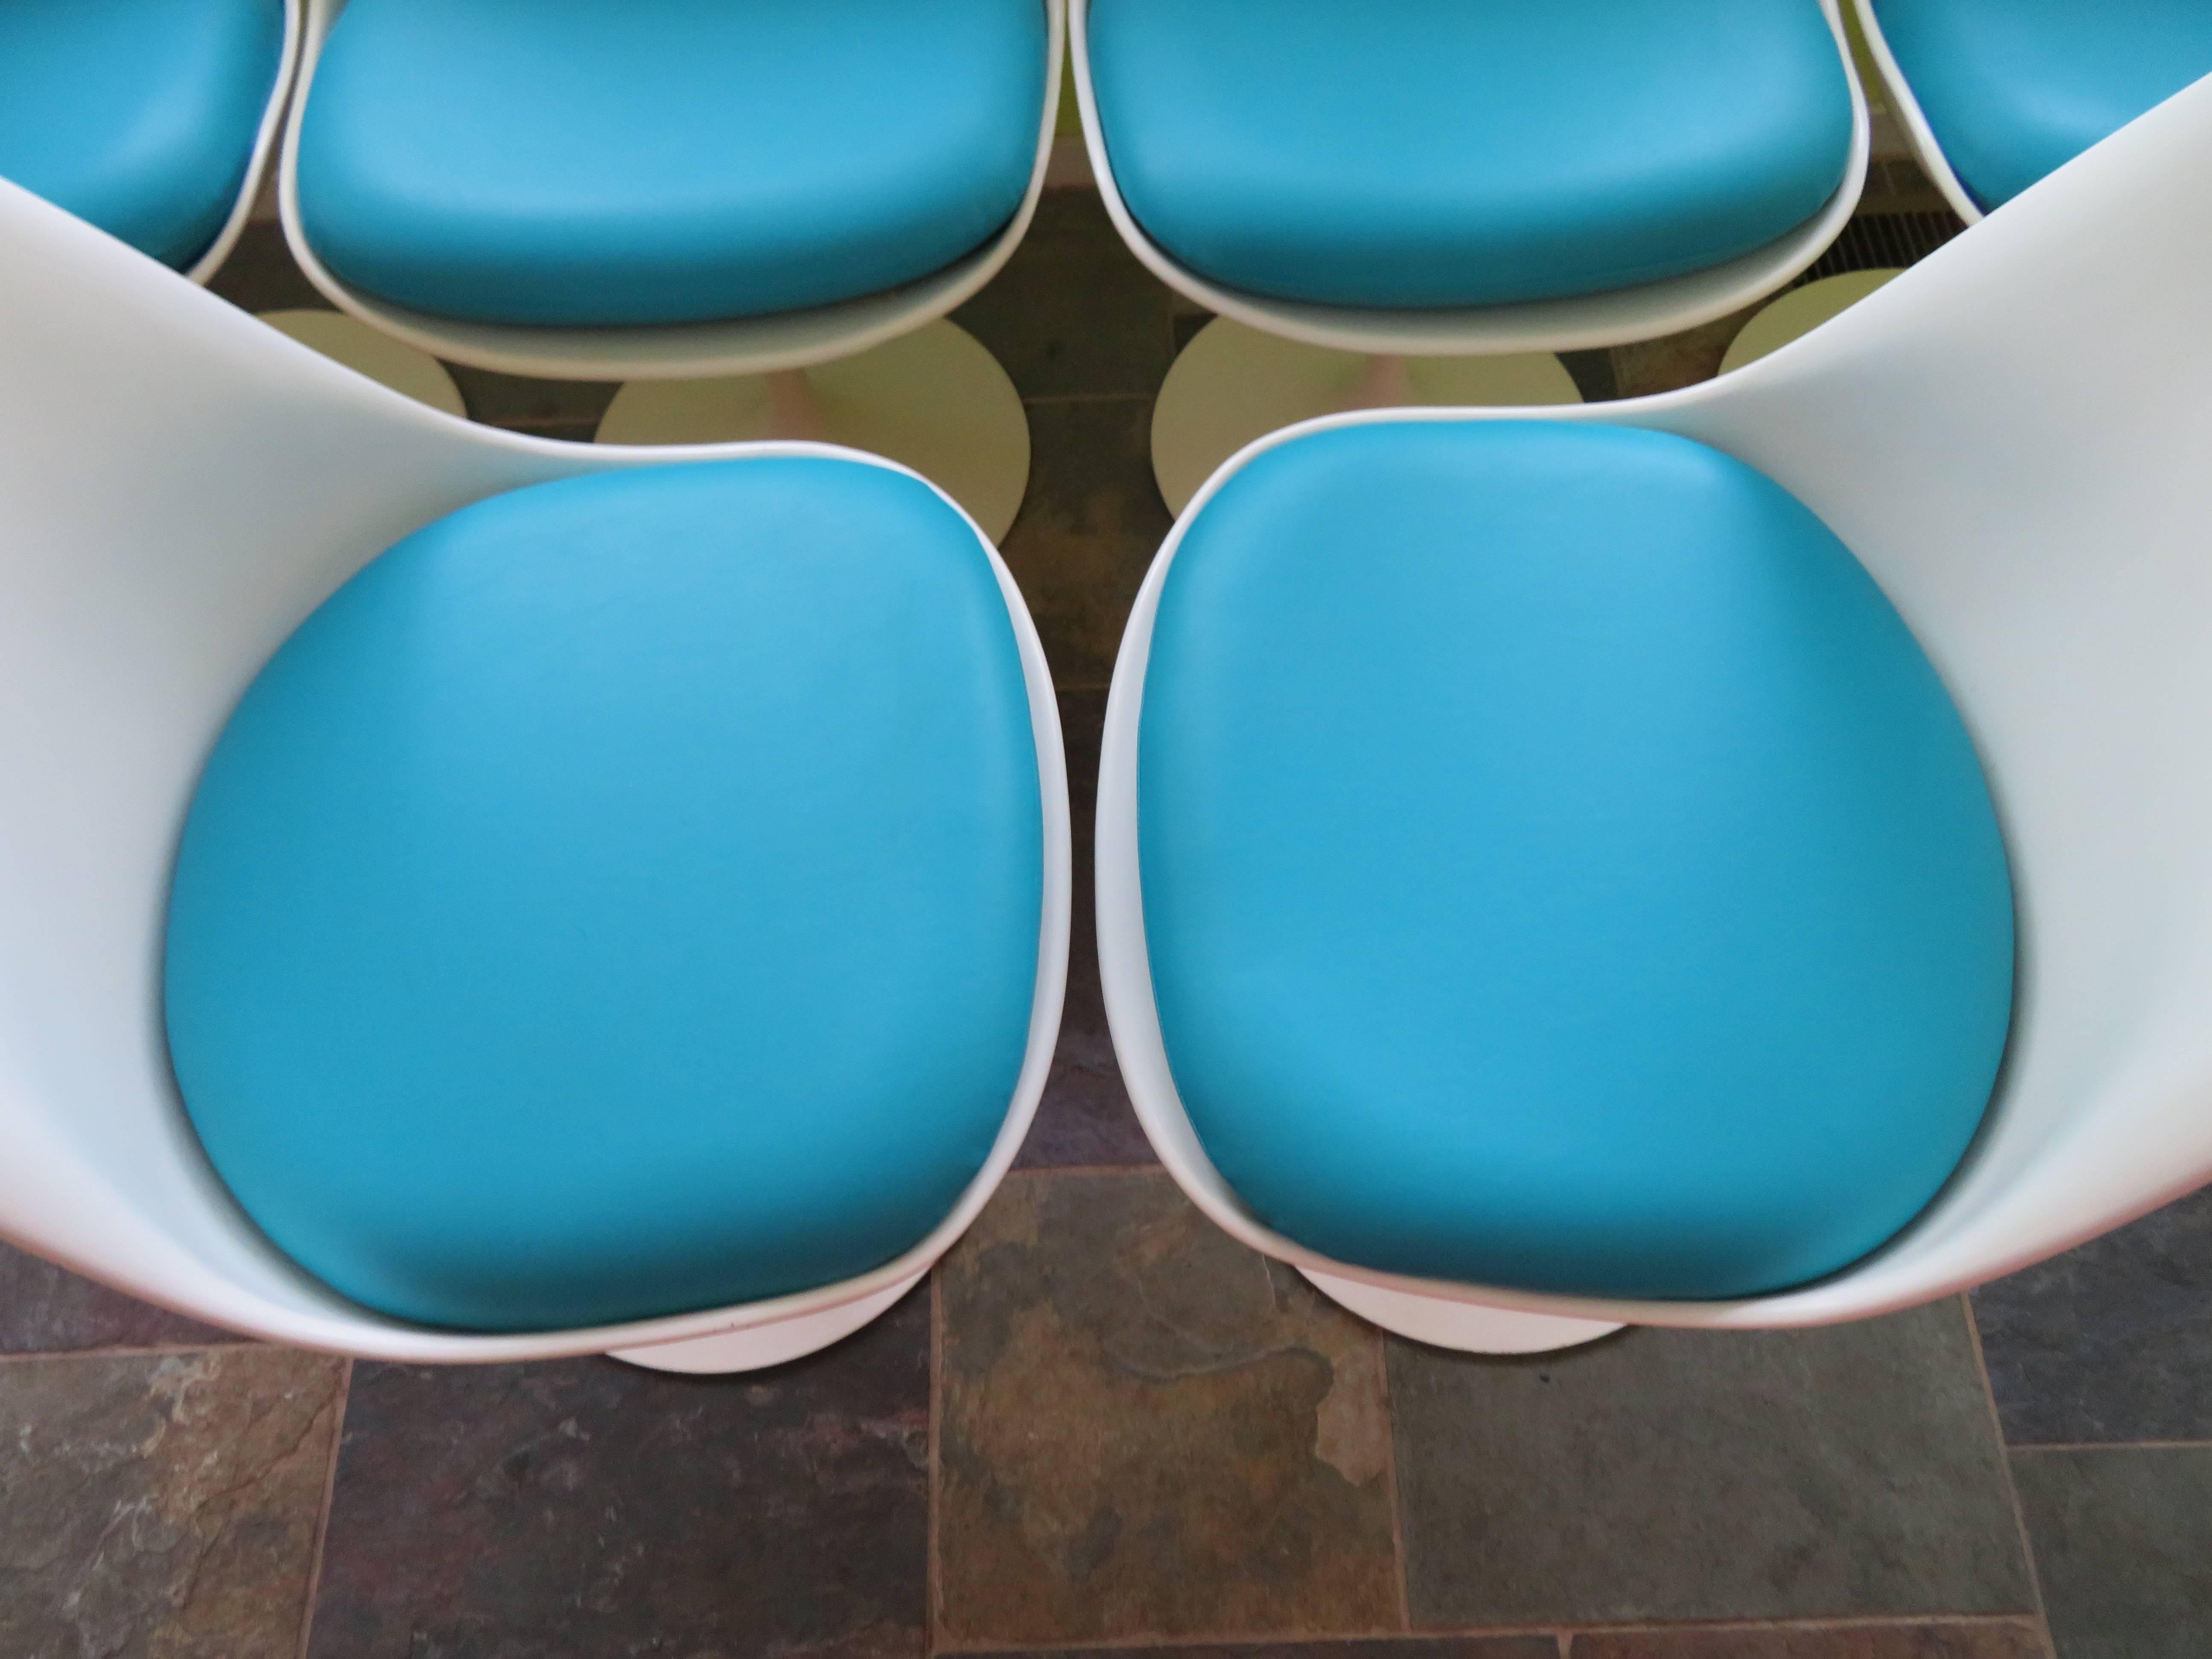 Super nice set of six signed Knoll vintage Saarinen swivel tulip dining chairs in very nice vintage condition-some of the nicest we have seen. The pads are new and are well constructed-we love the turquoise against the white!